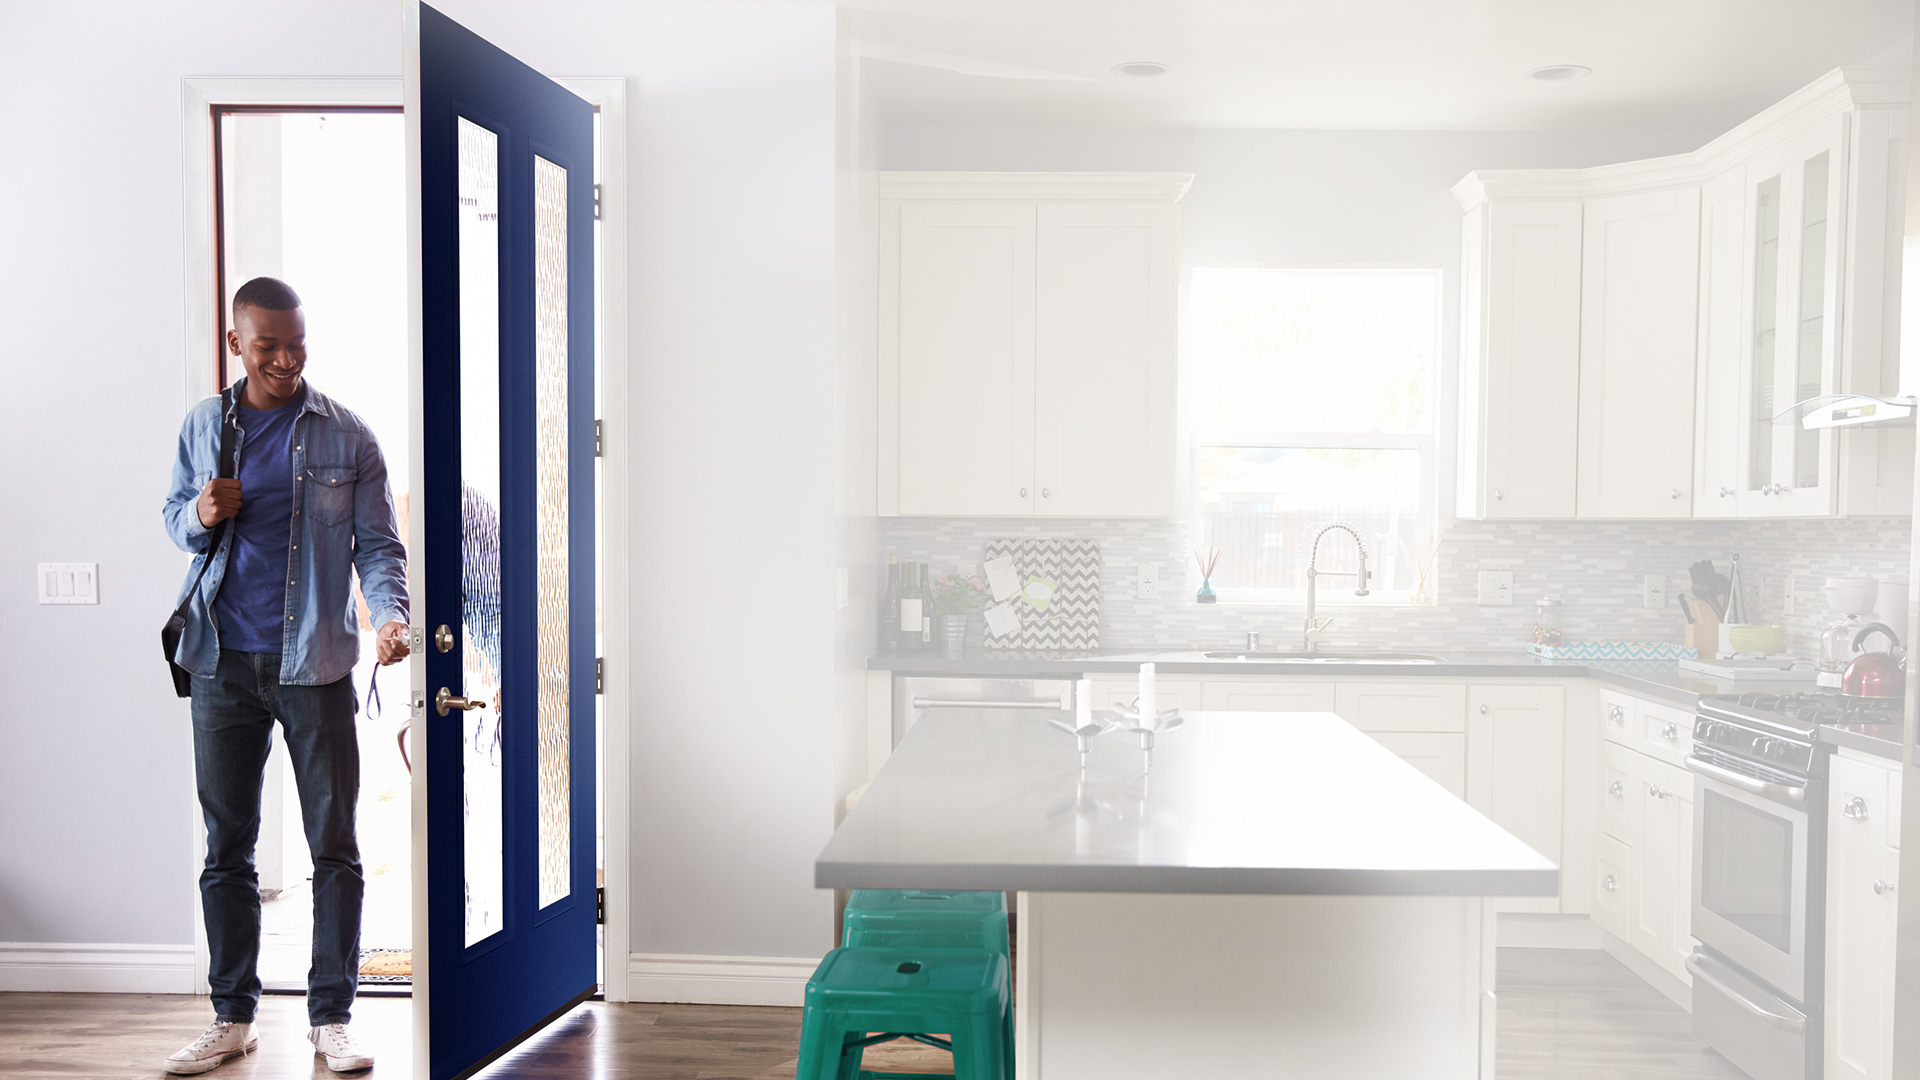 A man is coming into his modern home kitchen with a navy blue 2 vertical lite front door